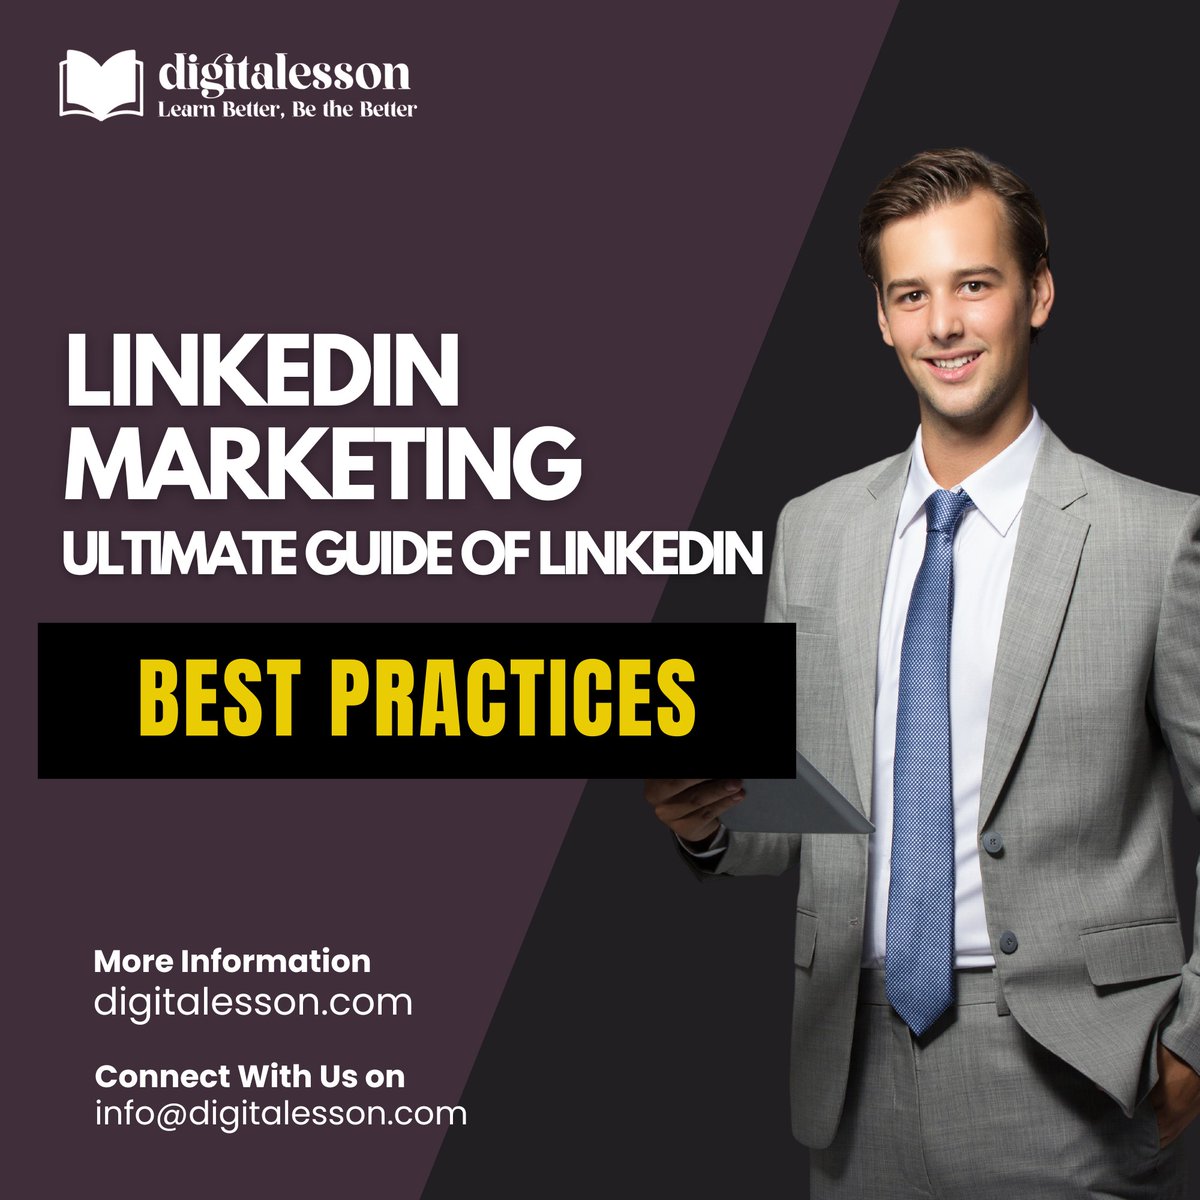 Master the art of LinkedIn marketing with the ultimate guide of best practices provided by DigitaLesson. 
.
Website: digitalesson.com
.
#digitalesson #LinkedInStrategy #DigitalMarketingTips #SocialMediaMarketing #LinkedInMarketing #DigitalMarketing #UltimateGuide